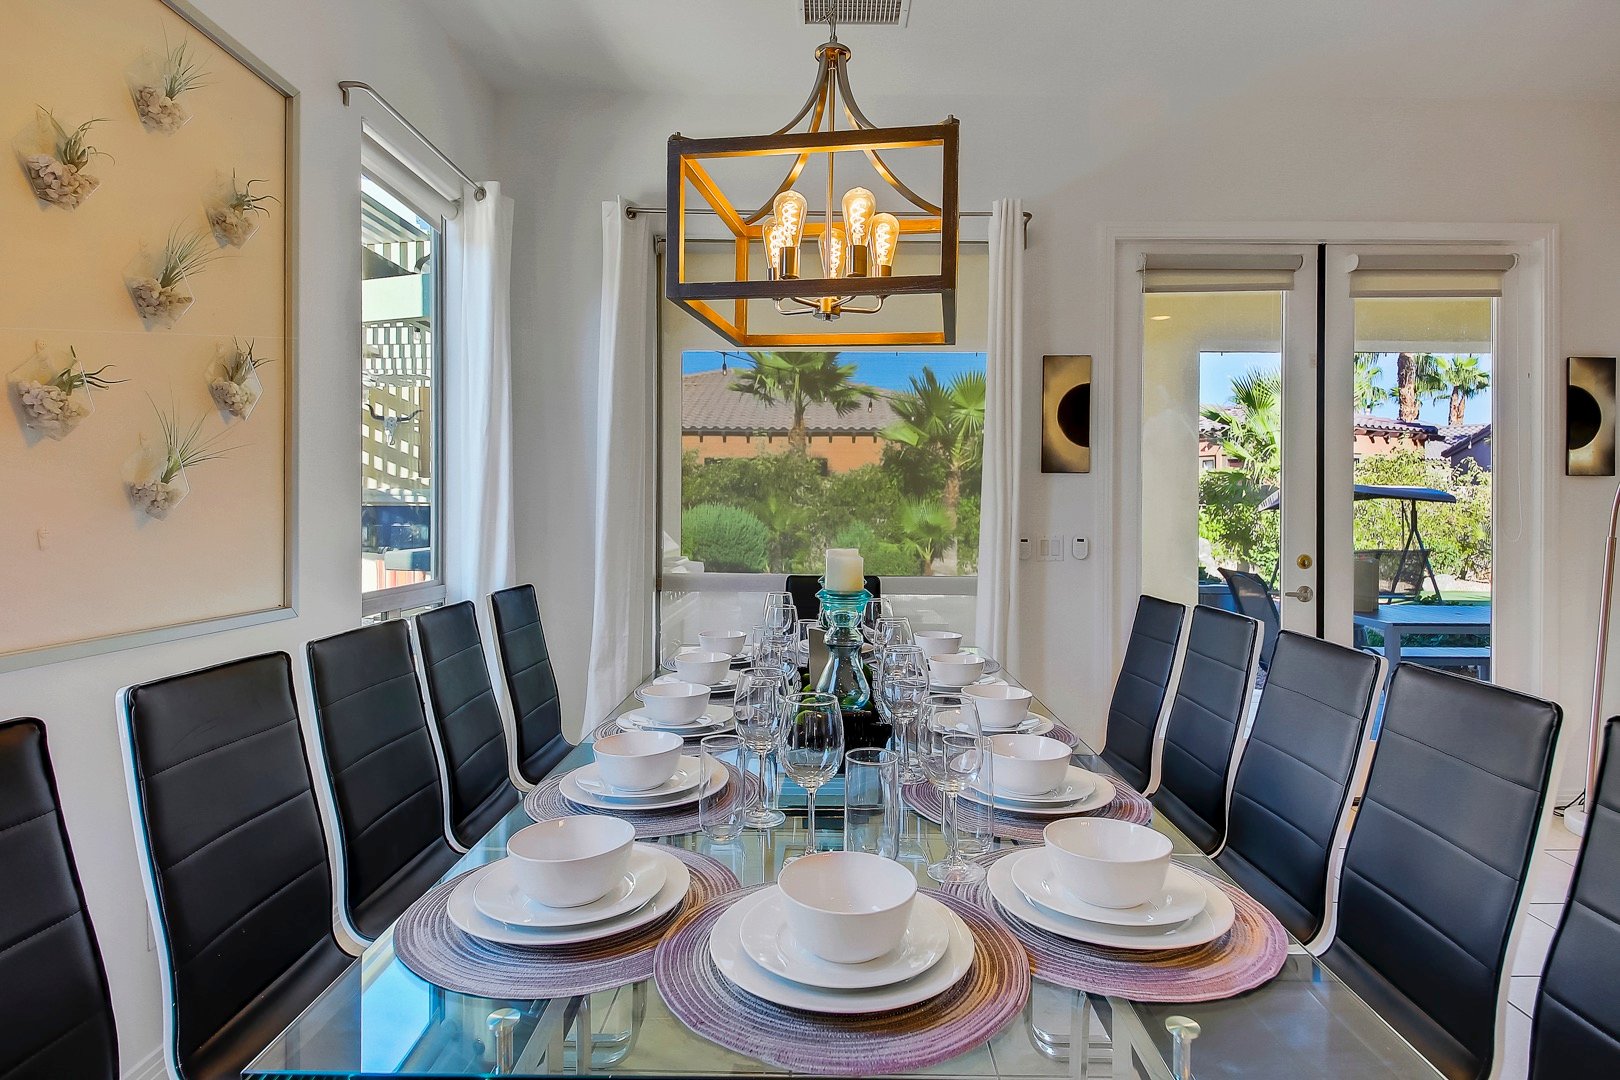 Our chefs can (and have) cooked up a huge turkey dinner to serve up on this modern table.